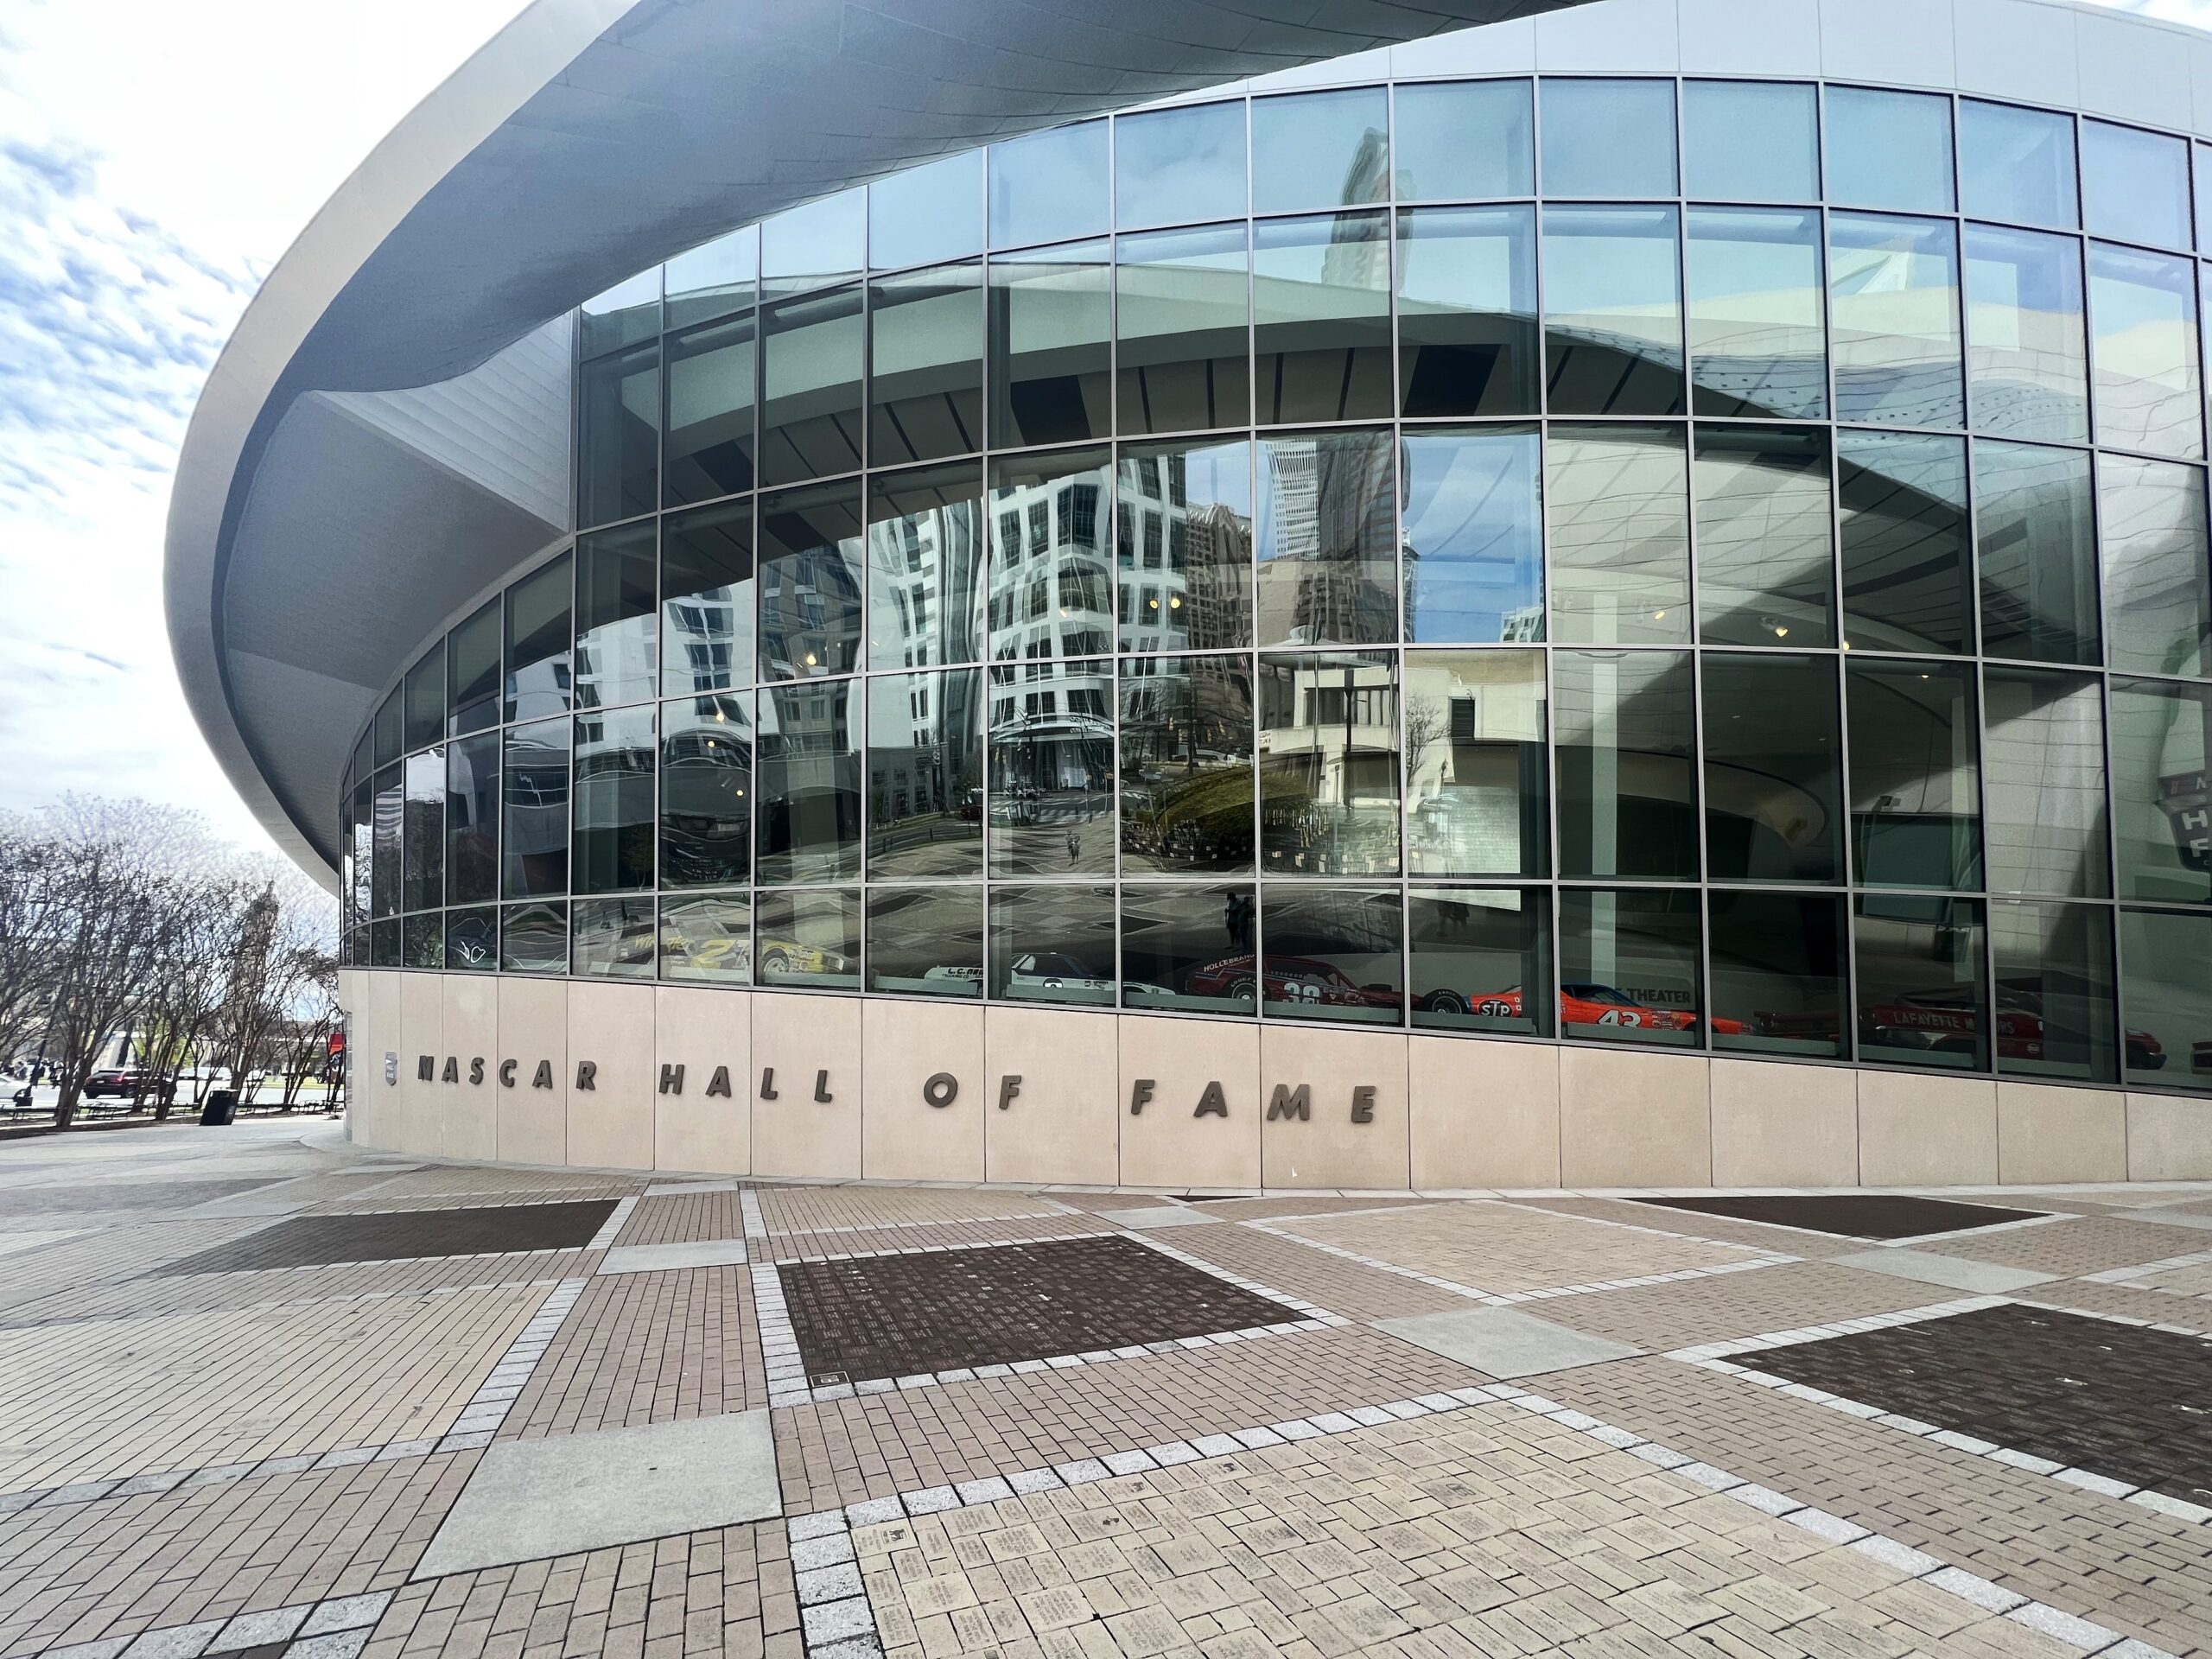 The Grand Hall of the NASCAR Hall of Fame in Charlotte, North Carolina.